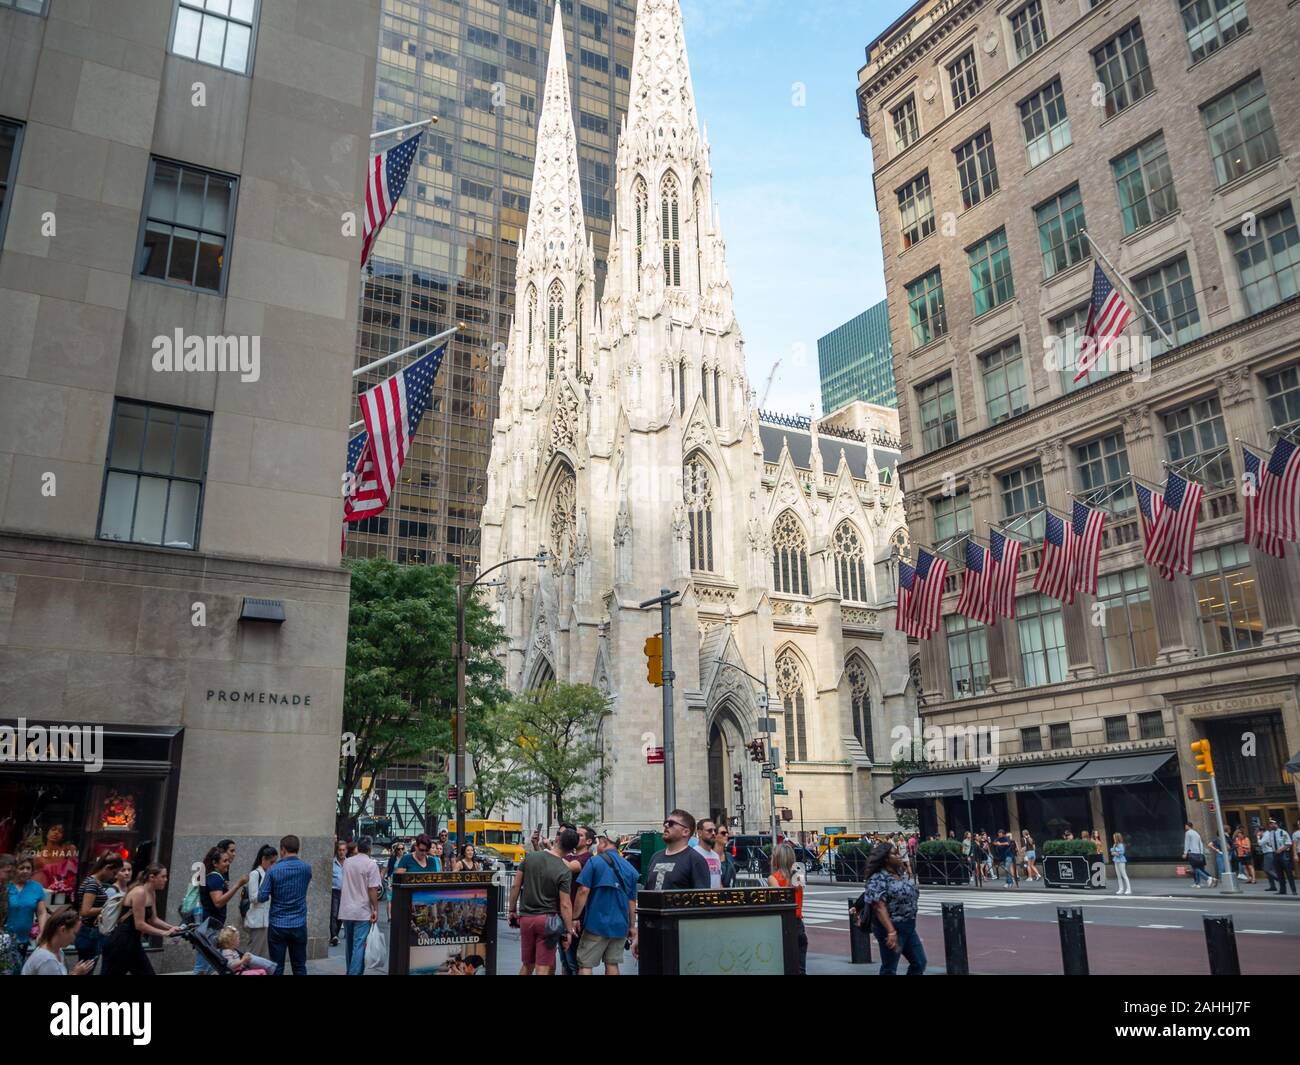 Manhattan, New York City, United States of America - St. Patrick's Cathedral next to Rockefeller Center Plaza, 5th ave, American flags street festival Stock Photo